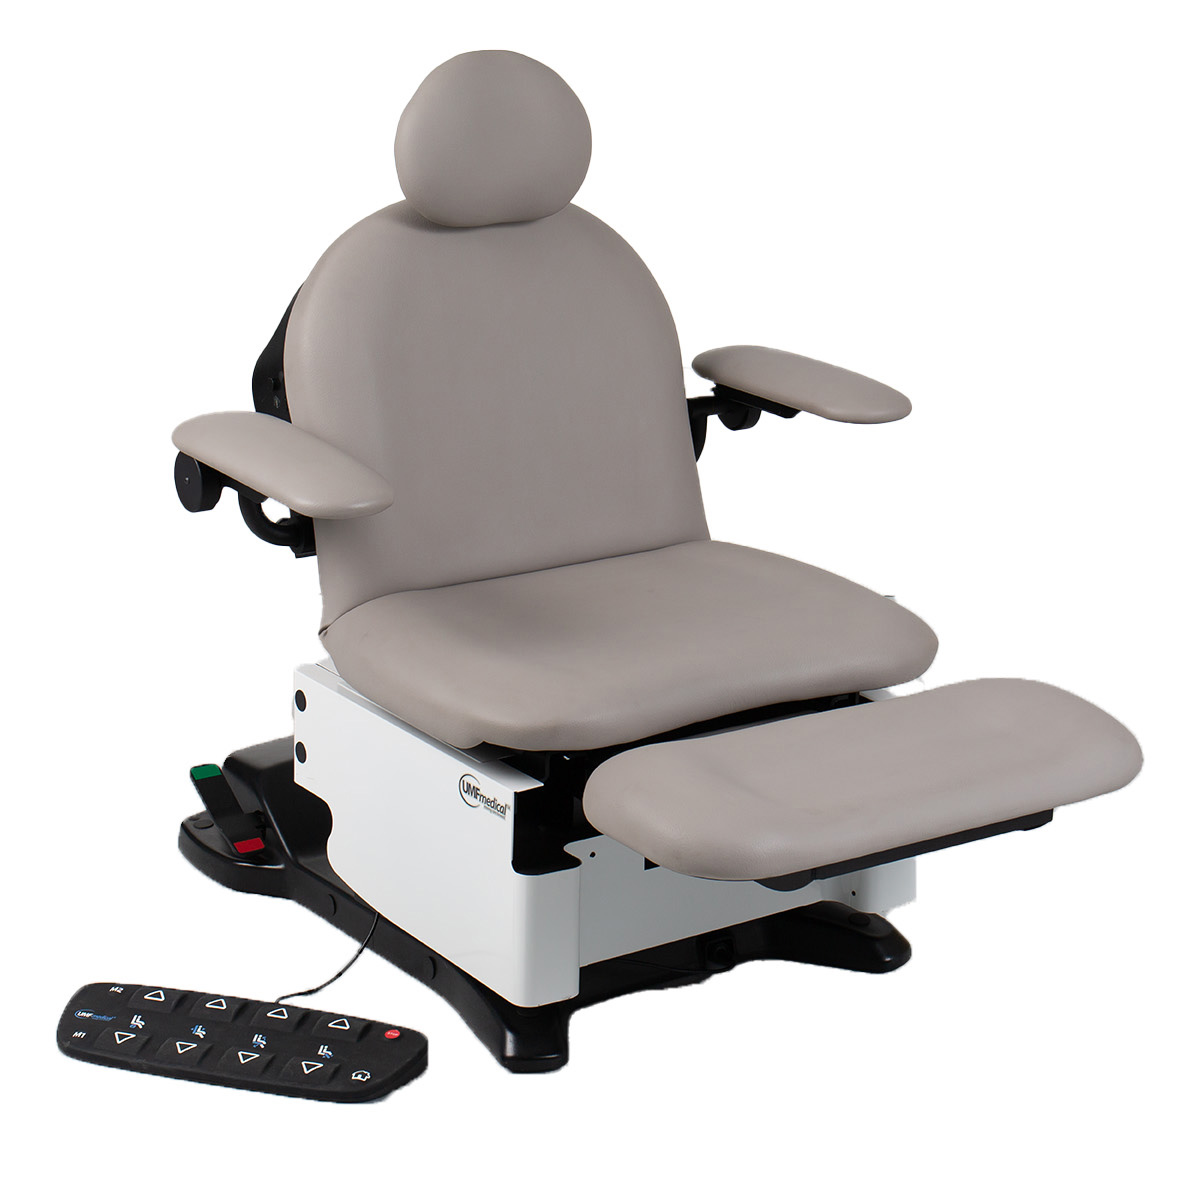 4010 Head-Centric Procedure Chairs - UMF Medical